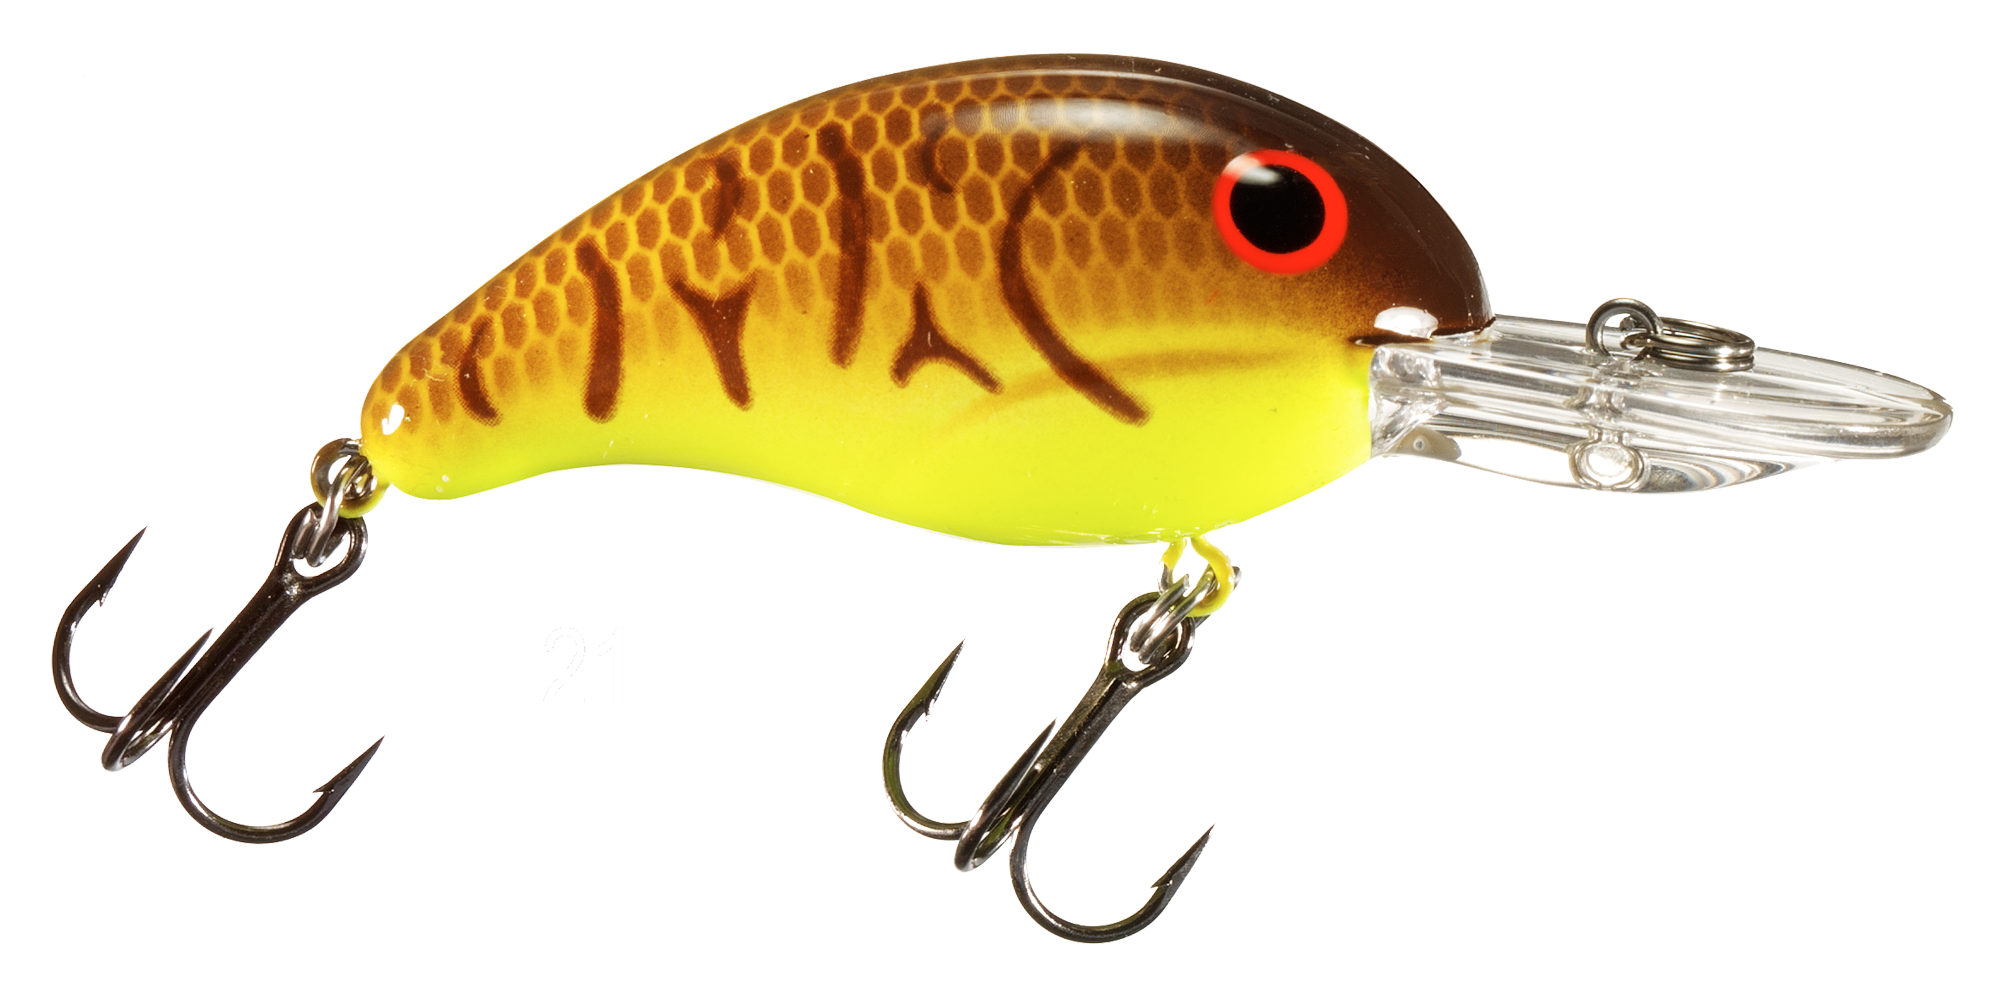 BANDIT LURES Series 200 Crankbait Bass Fishing Lures, Fishing Accessories,  Dives to 8-feet Deep, 2', 1/4 oz, Brown Craw Orange Belly, (BDT204)